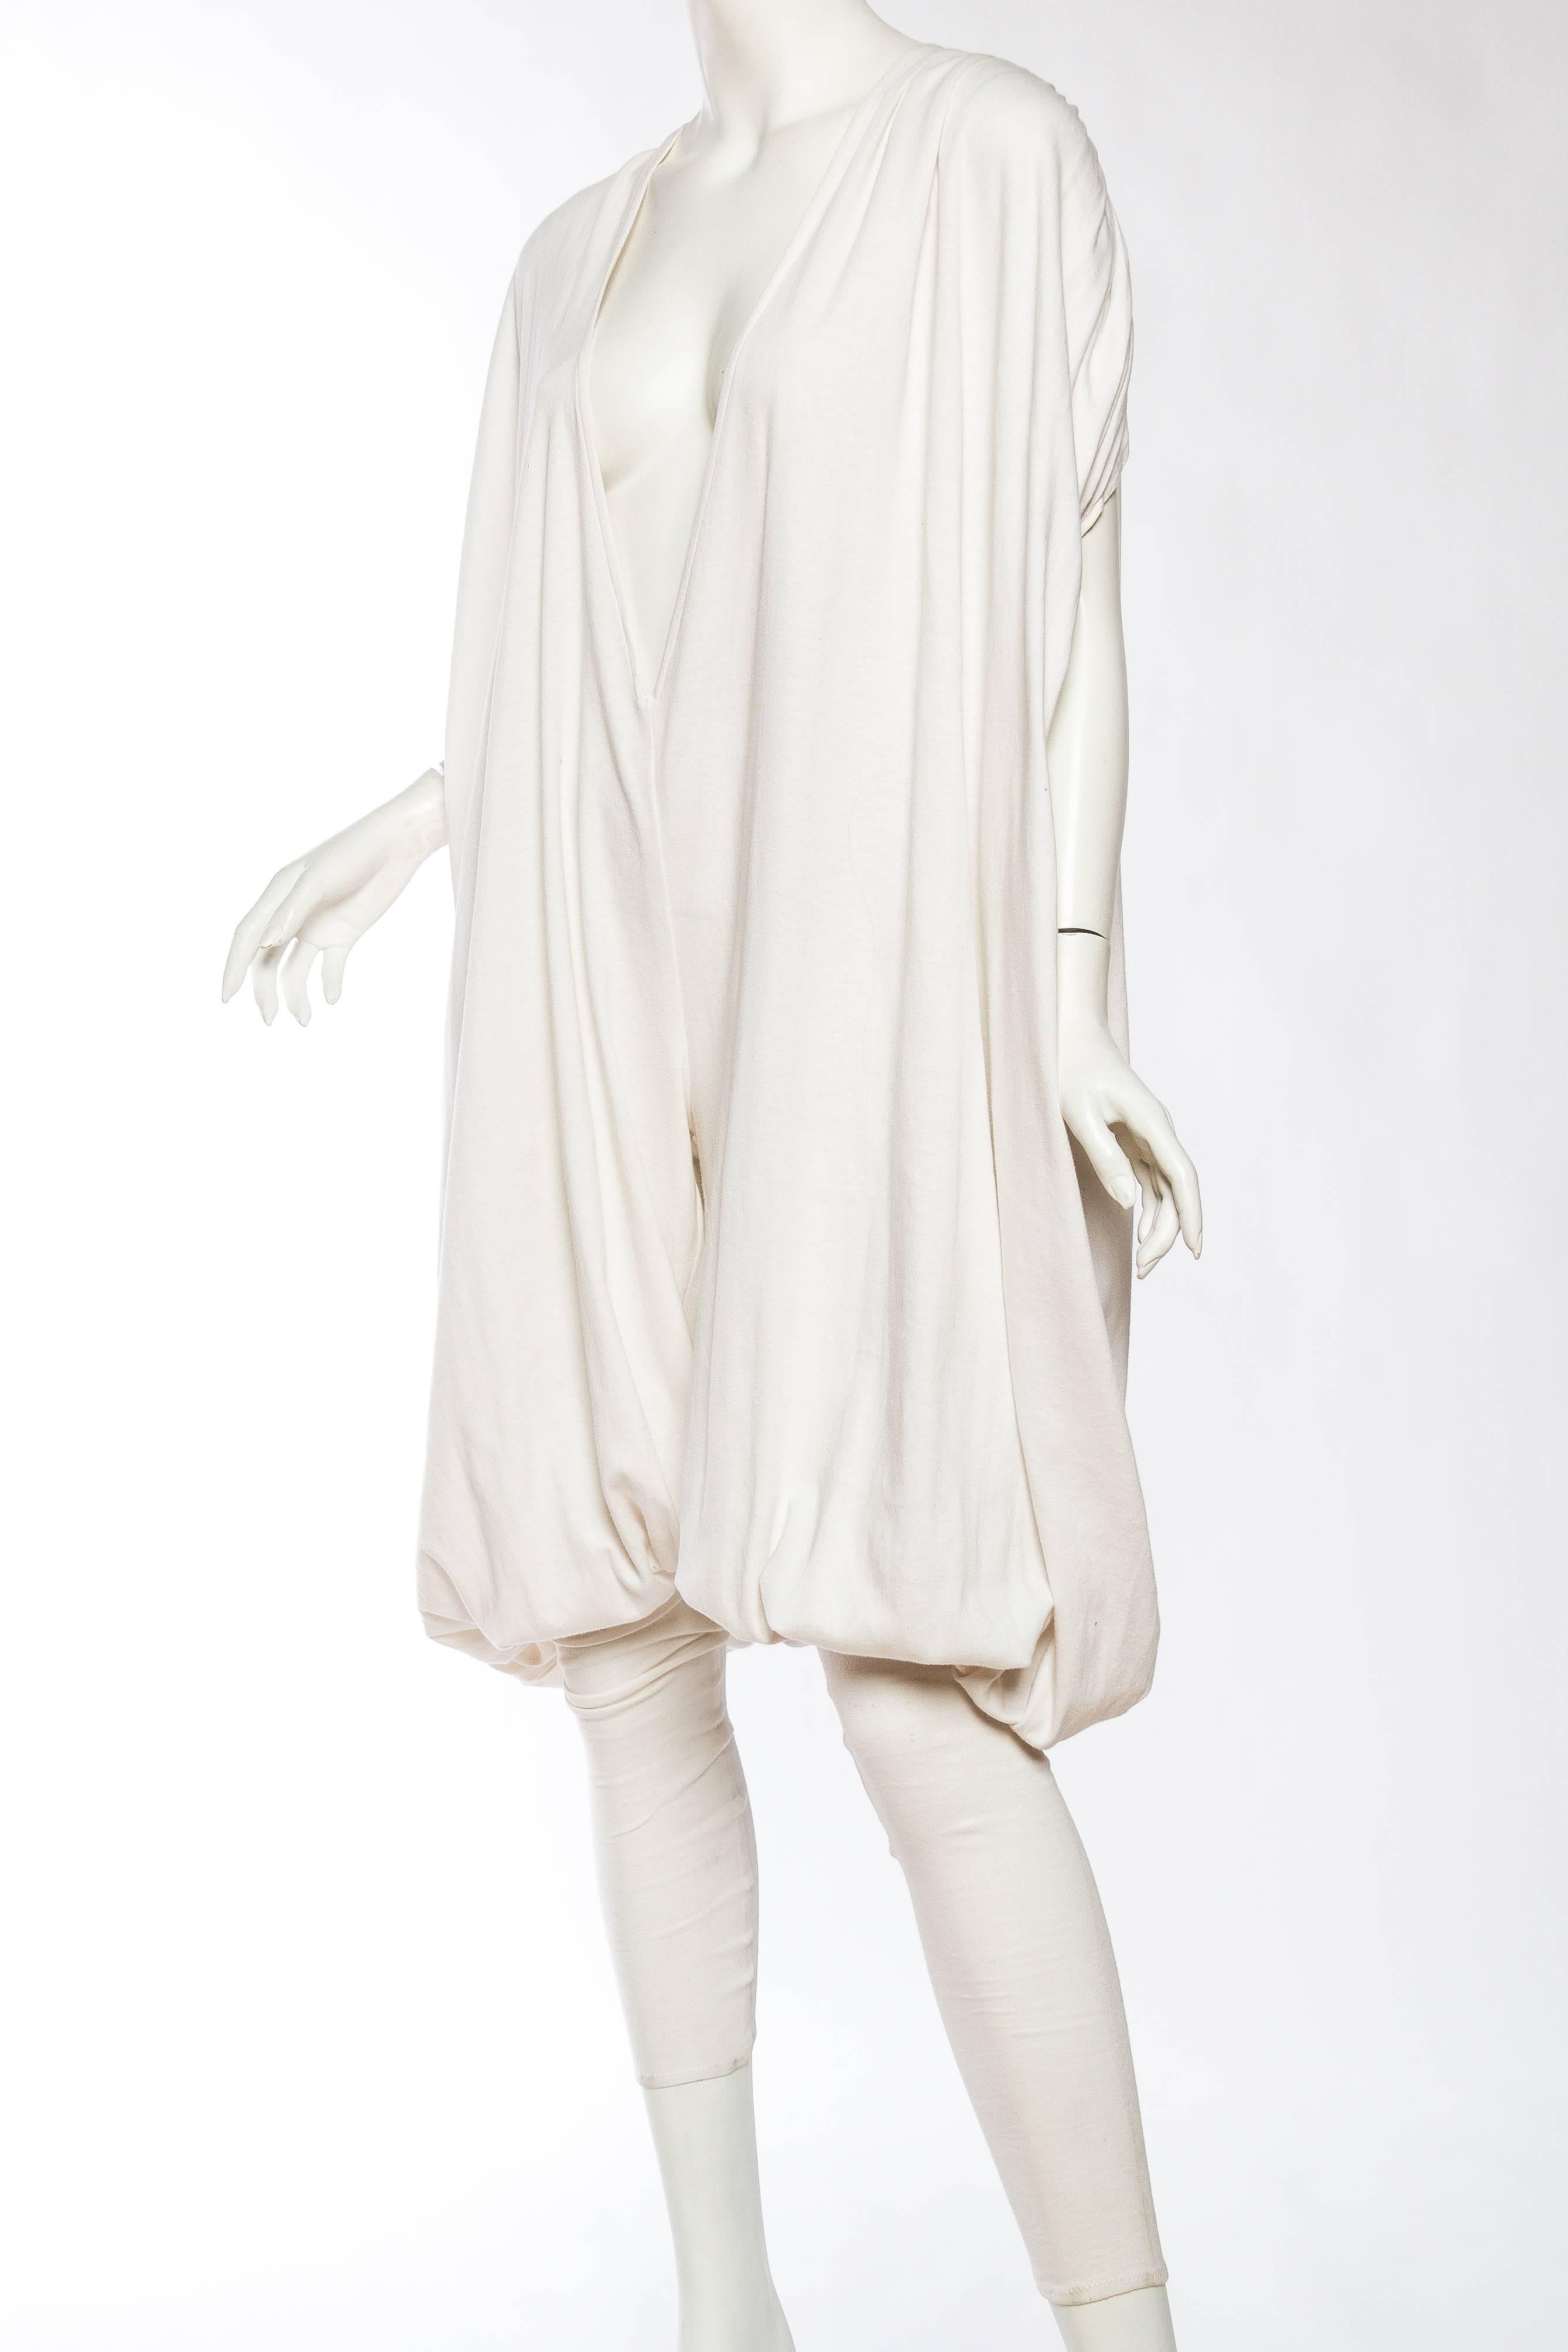 Women's Early Norma Kamali from the 1970s Volumunous White Cotton Jersey Jumpsuit